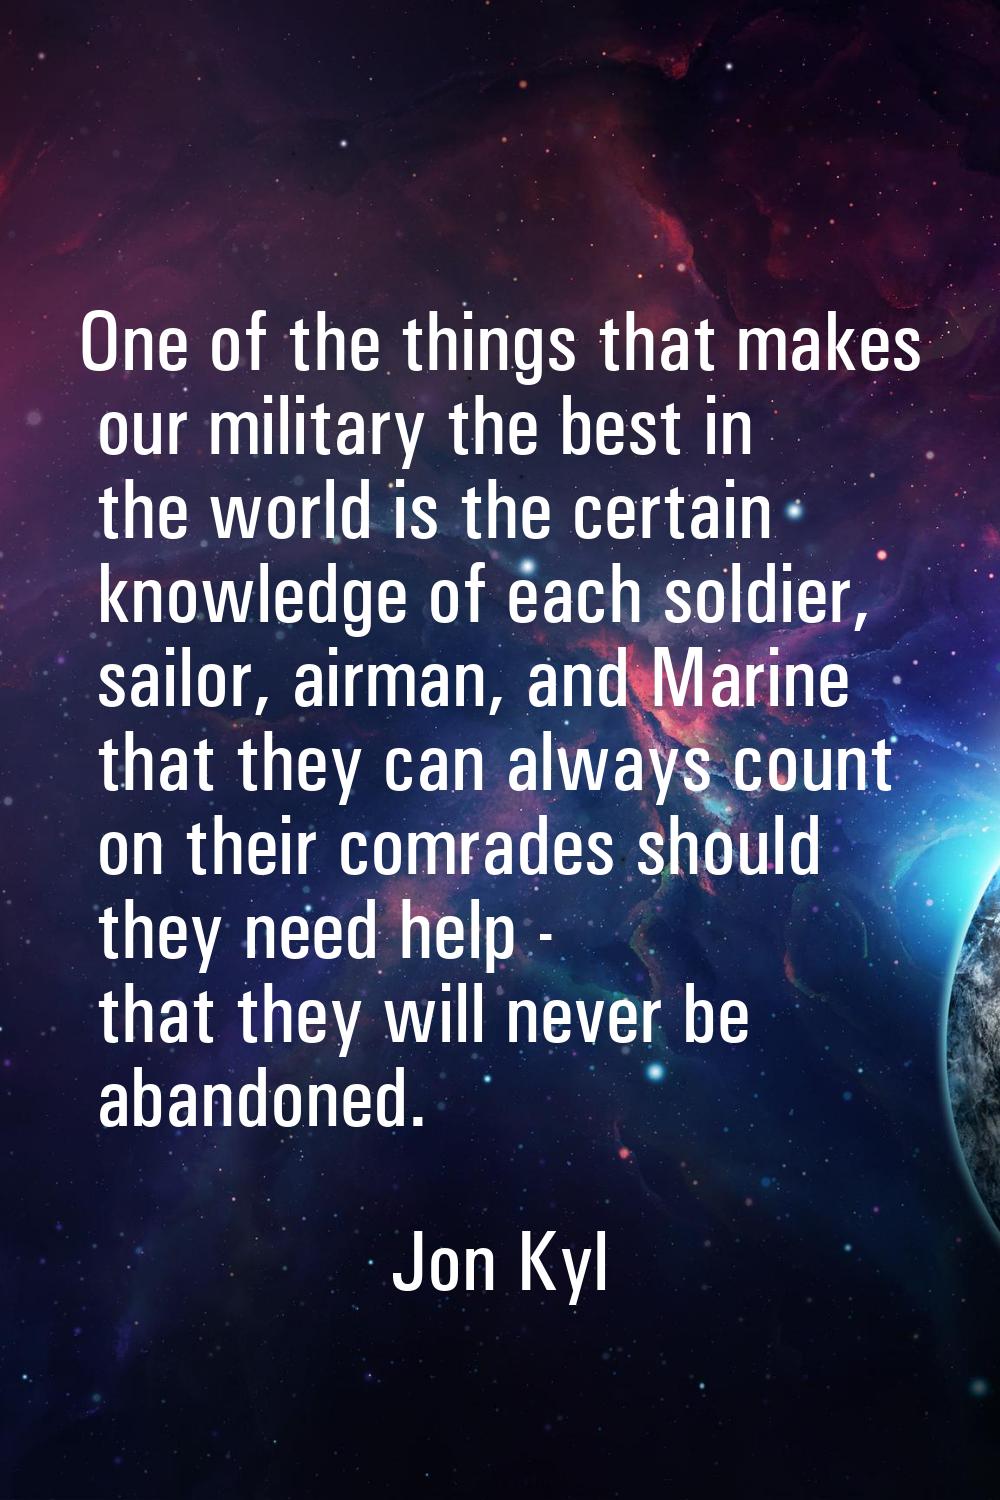 One of the things that makes our military the best in the world is the certain knowledge of each so